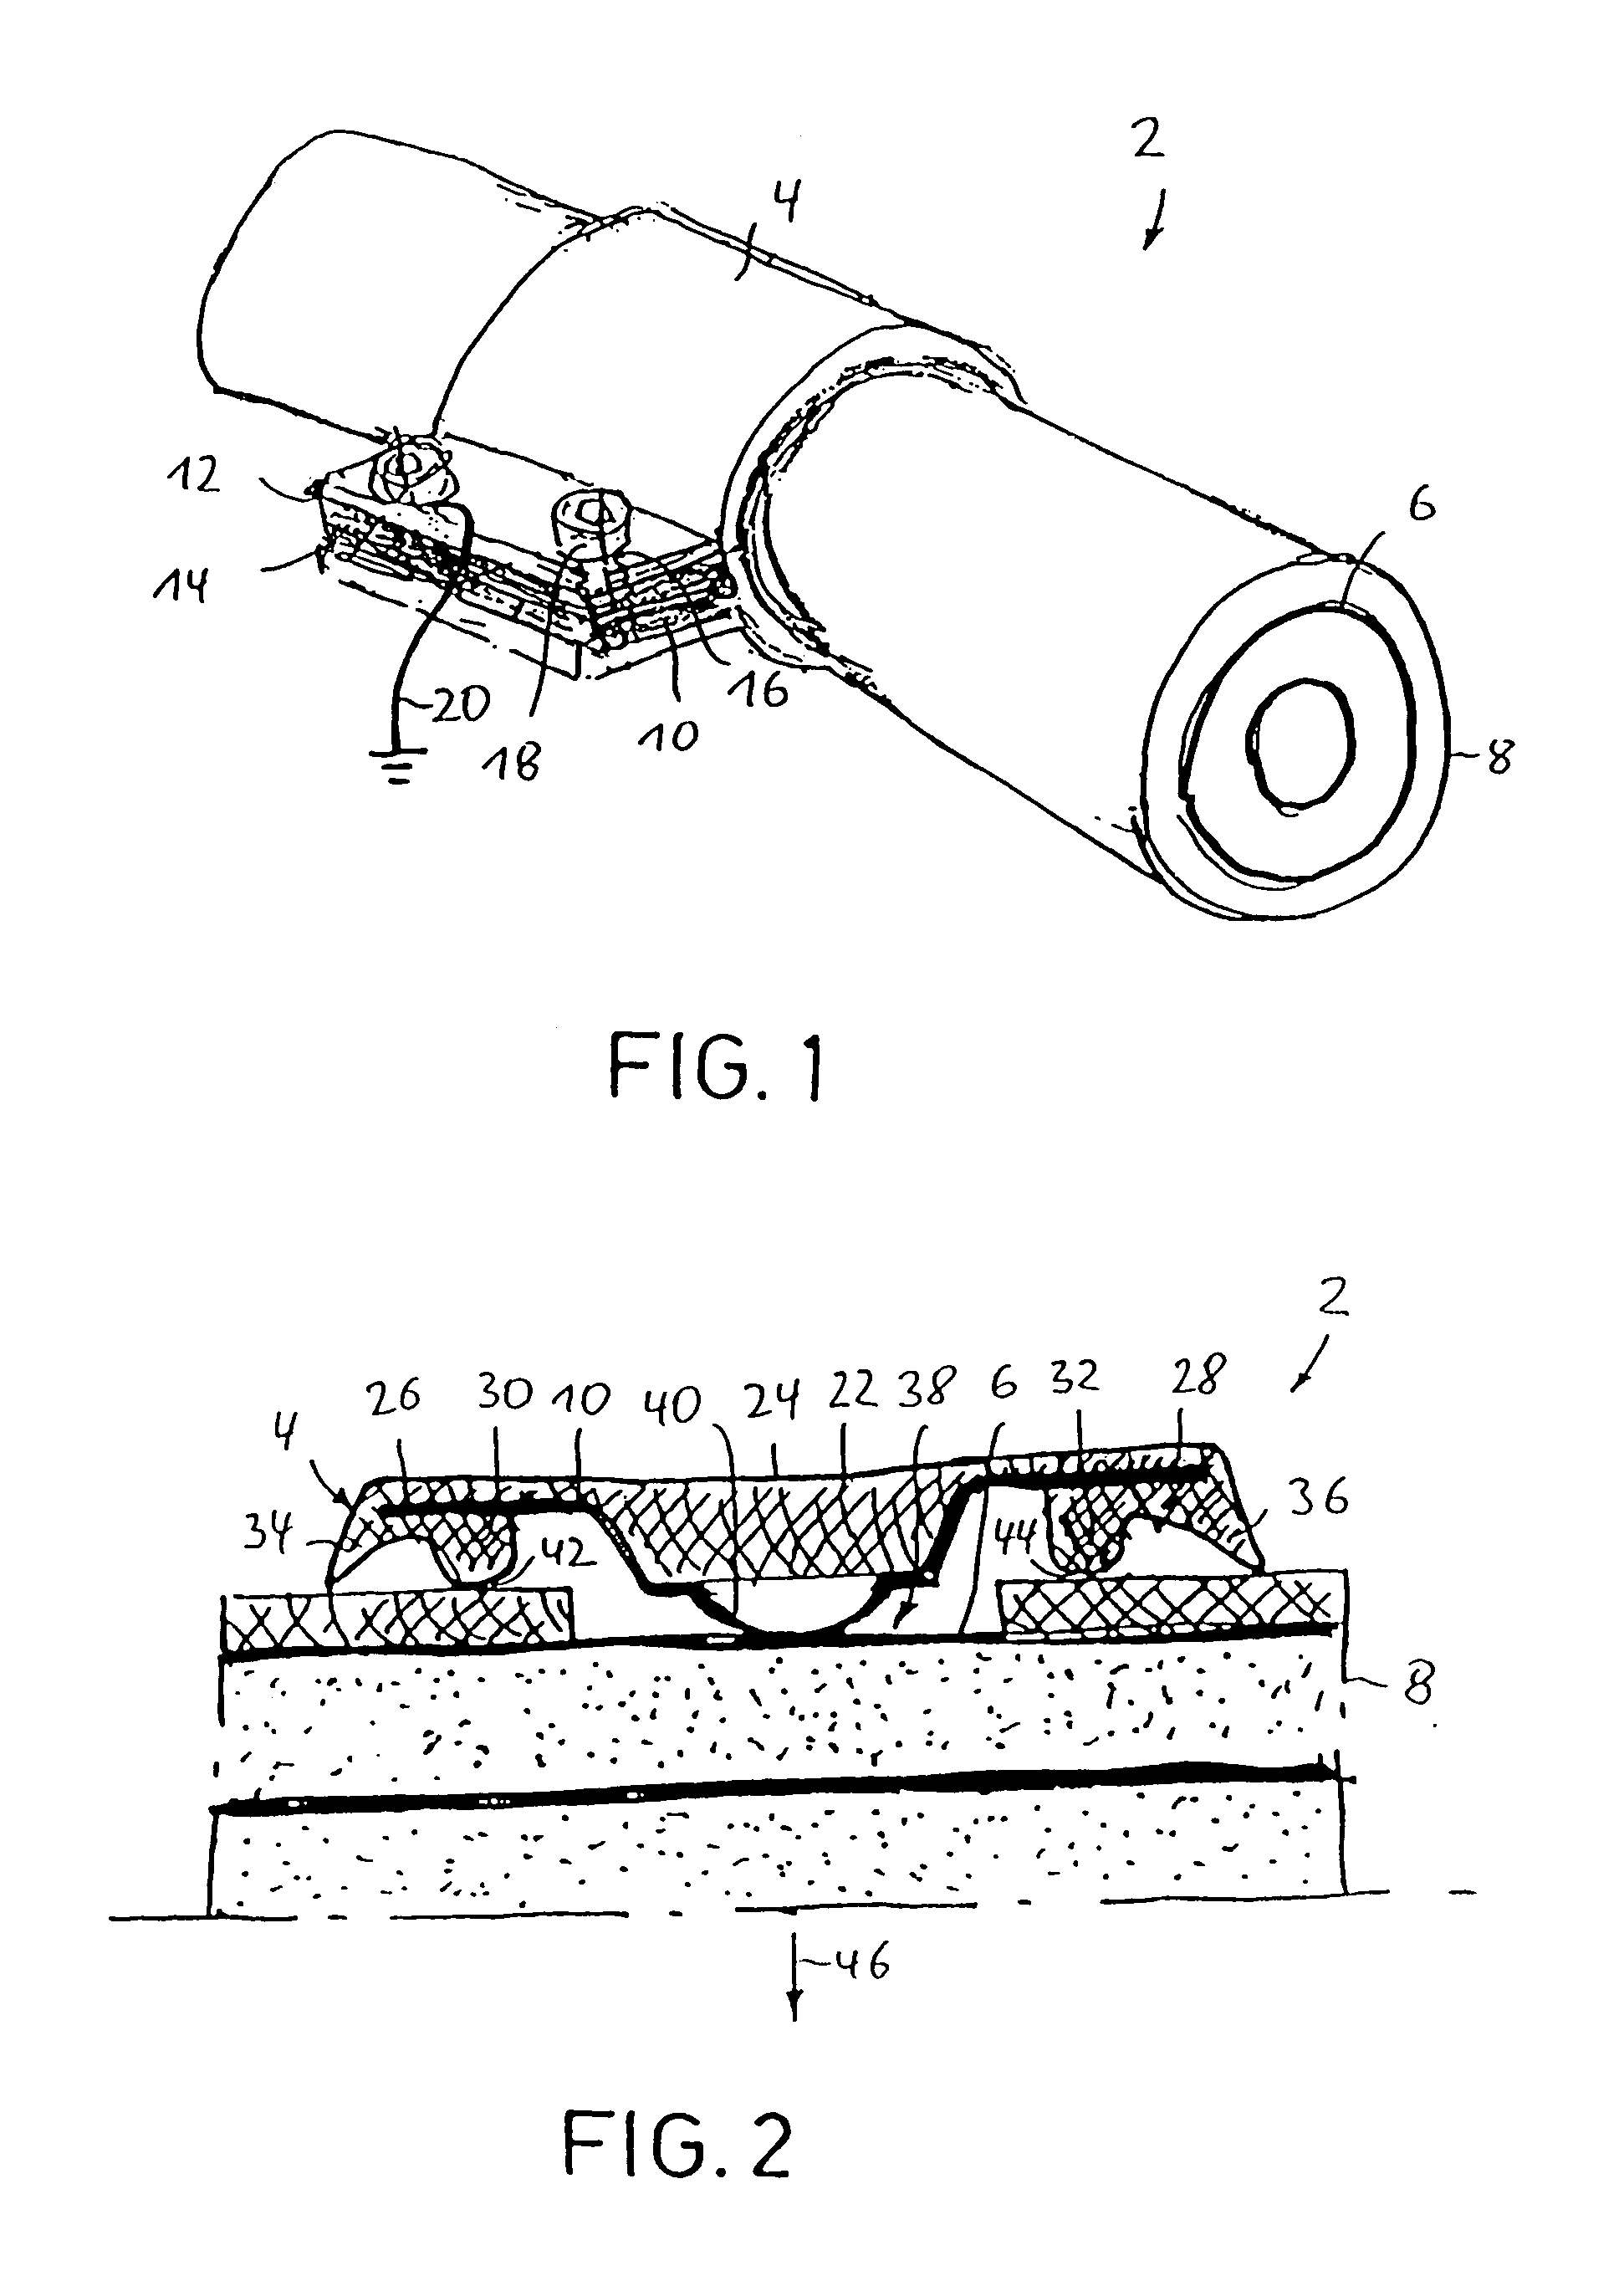 Device for contacting in particular elongated, illustratively substantially cylindrical bodies such as cables or pipes/tubes